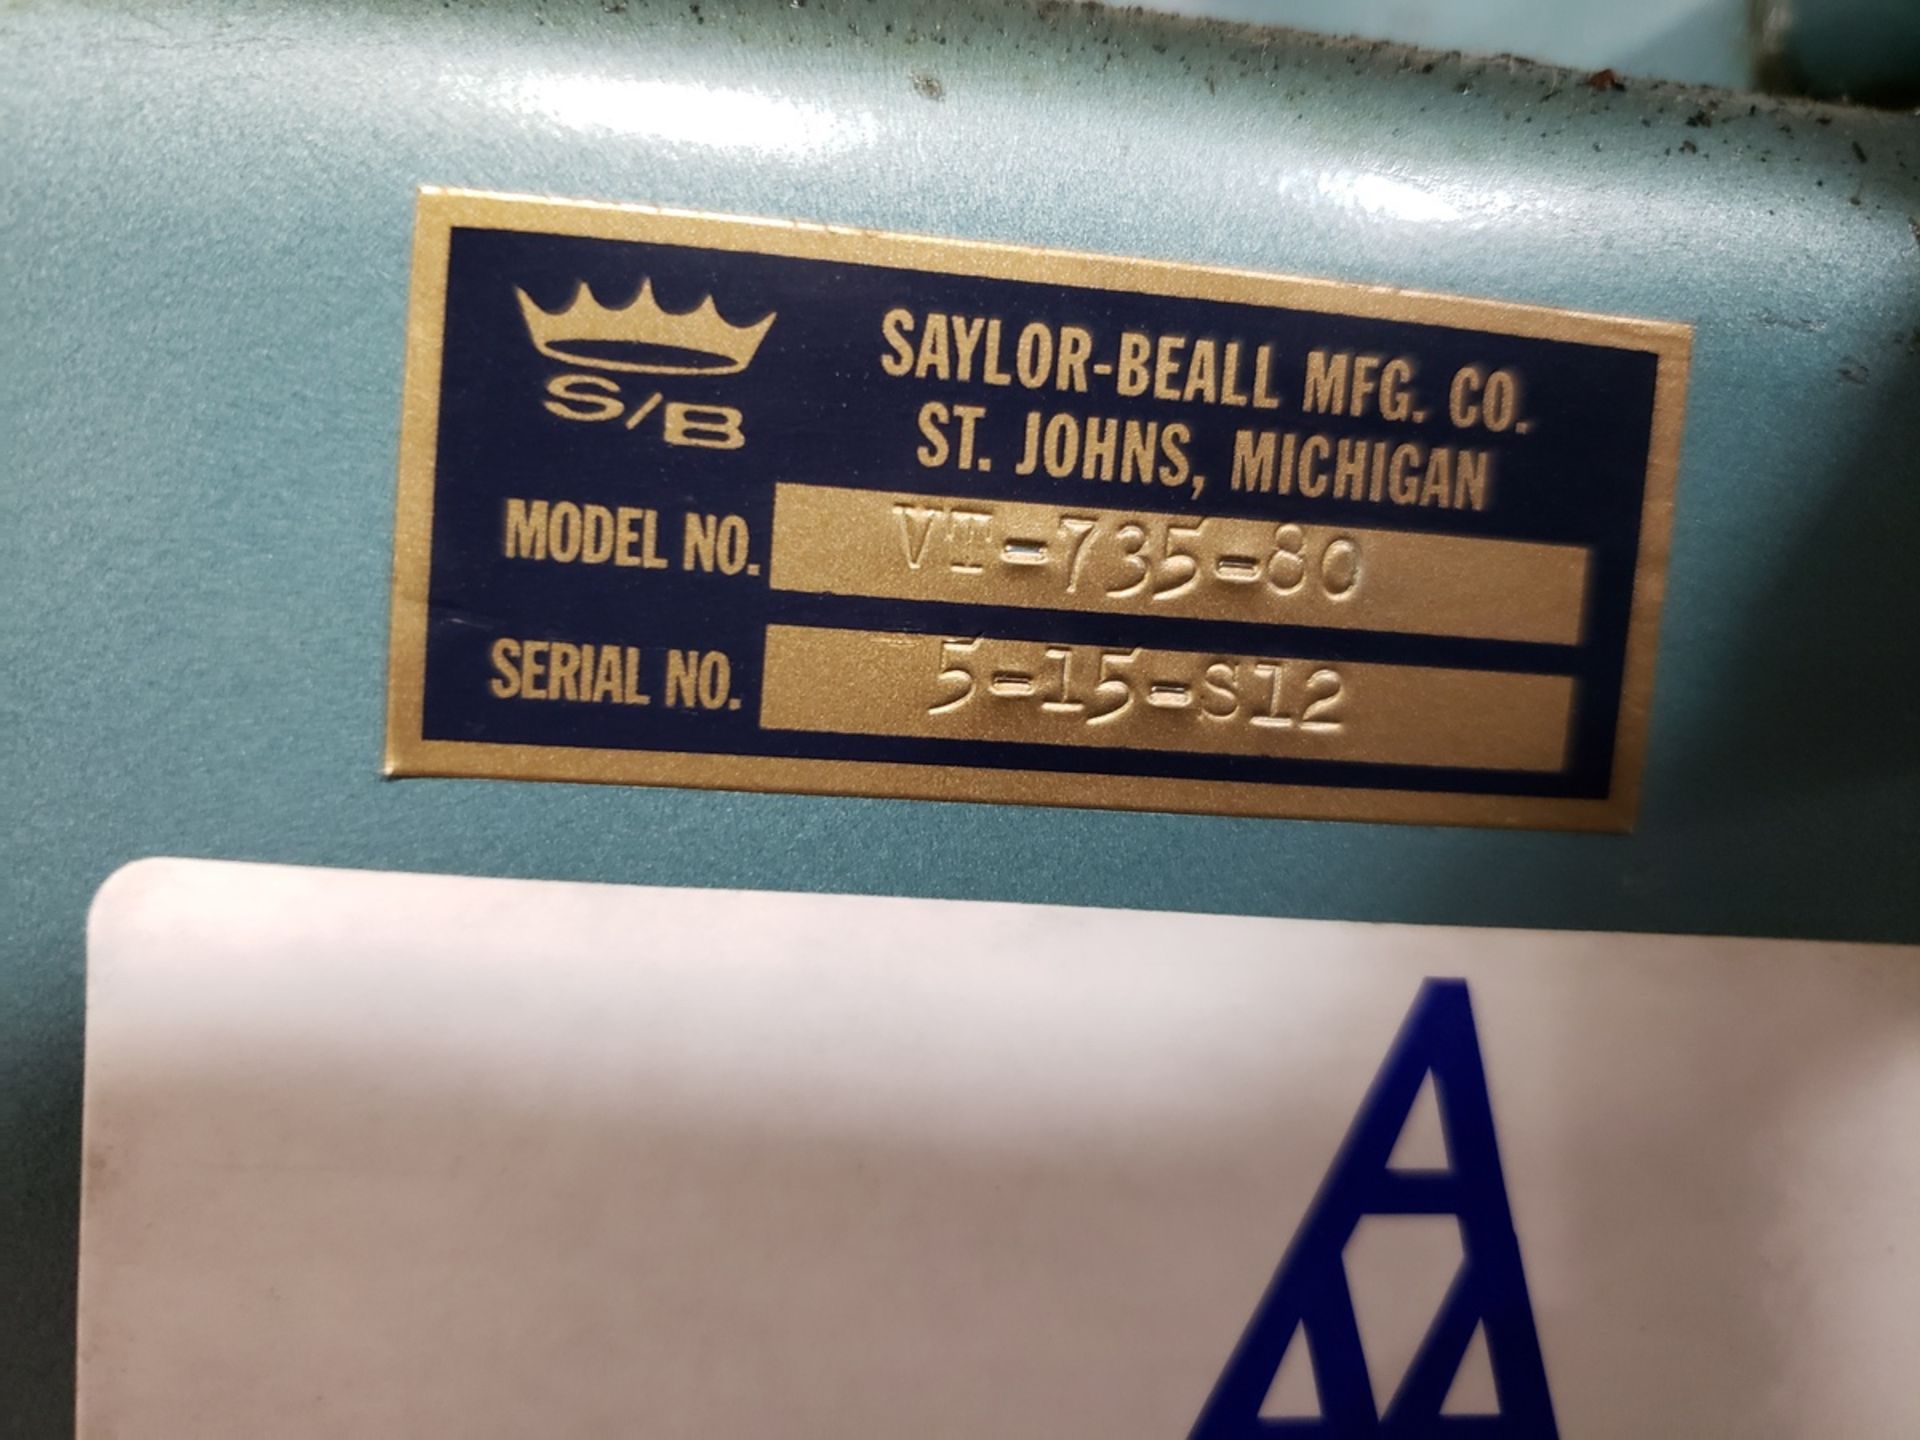 Saylor-Beall Air Compressor, M# VT-735-80, S/N 5-15-S12 | Rig Fee $100 - Image 2 of 3